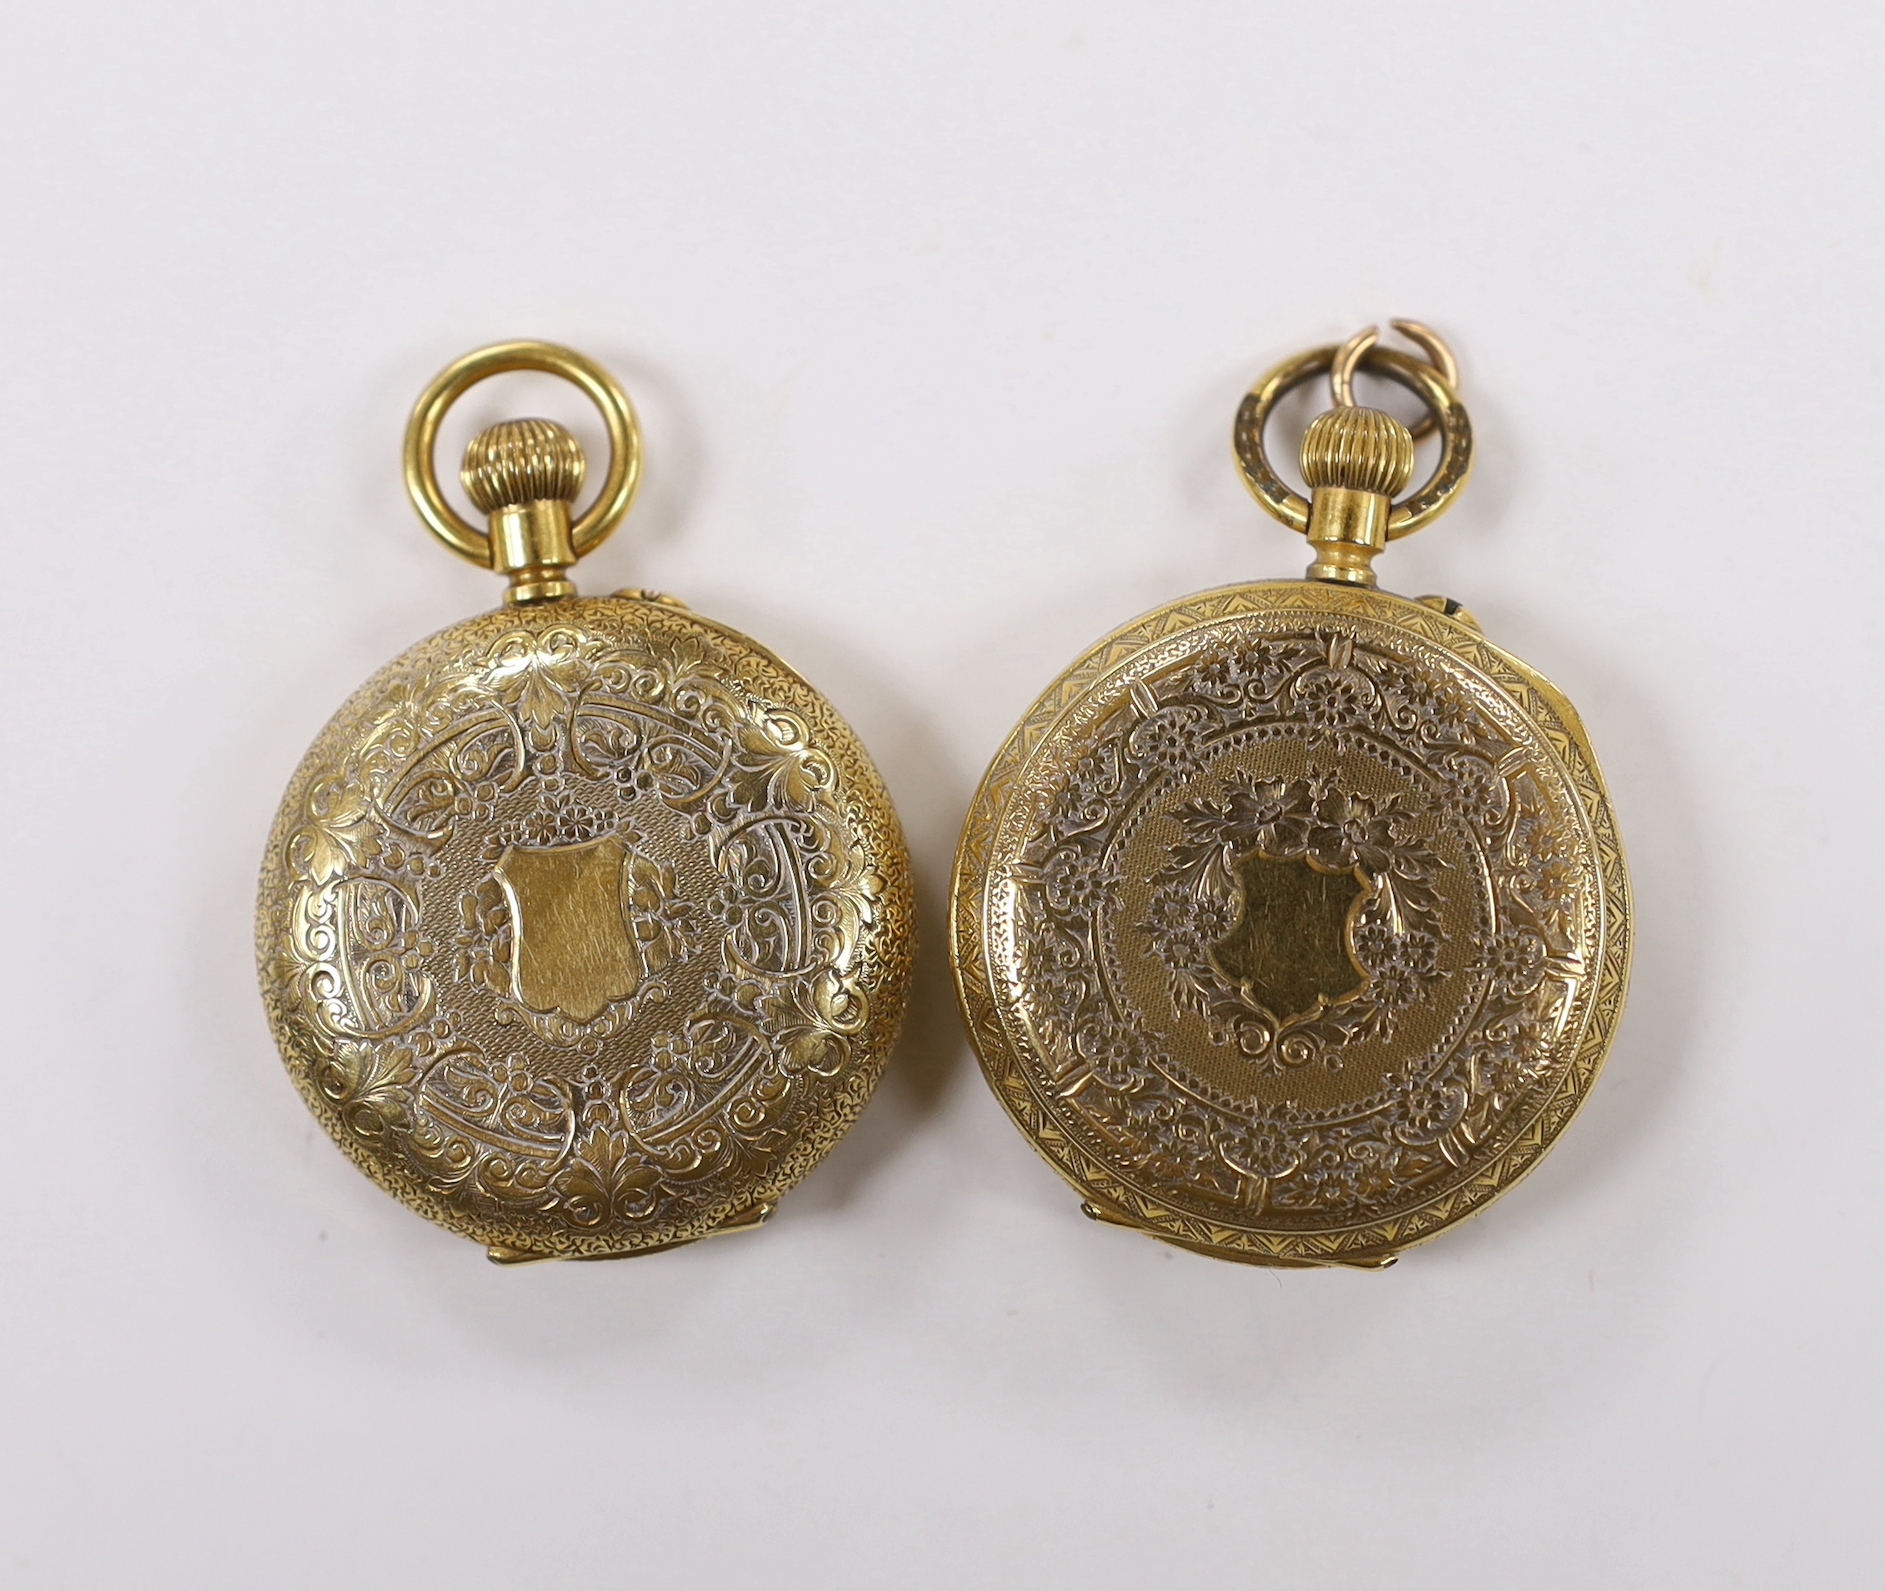 An early 20th century Swiss 18ct and enamel half hunter fob watch and one other 18k open face fob watch, with Roman dial, gross weight 86.8 grams.